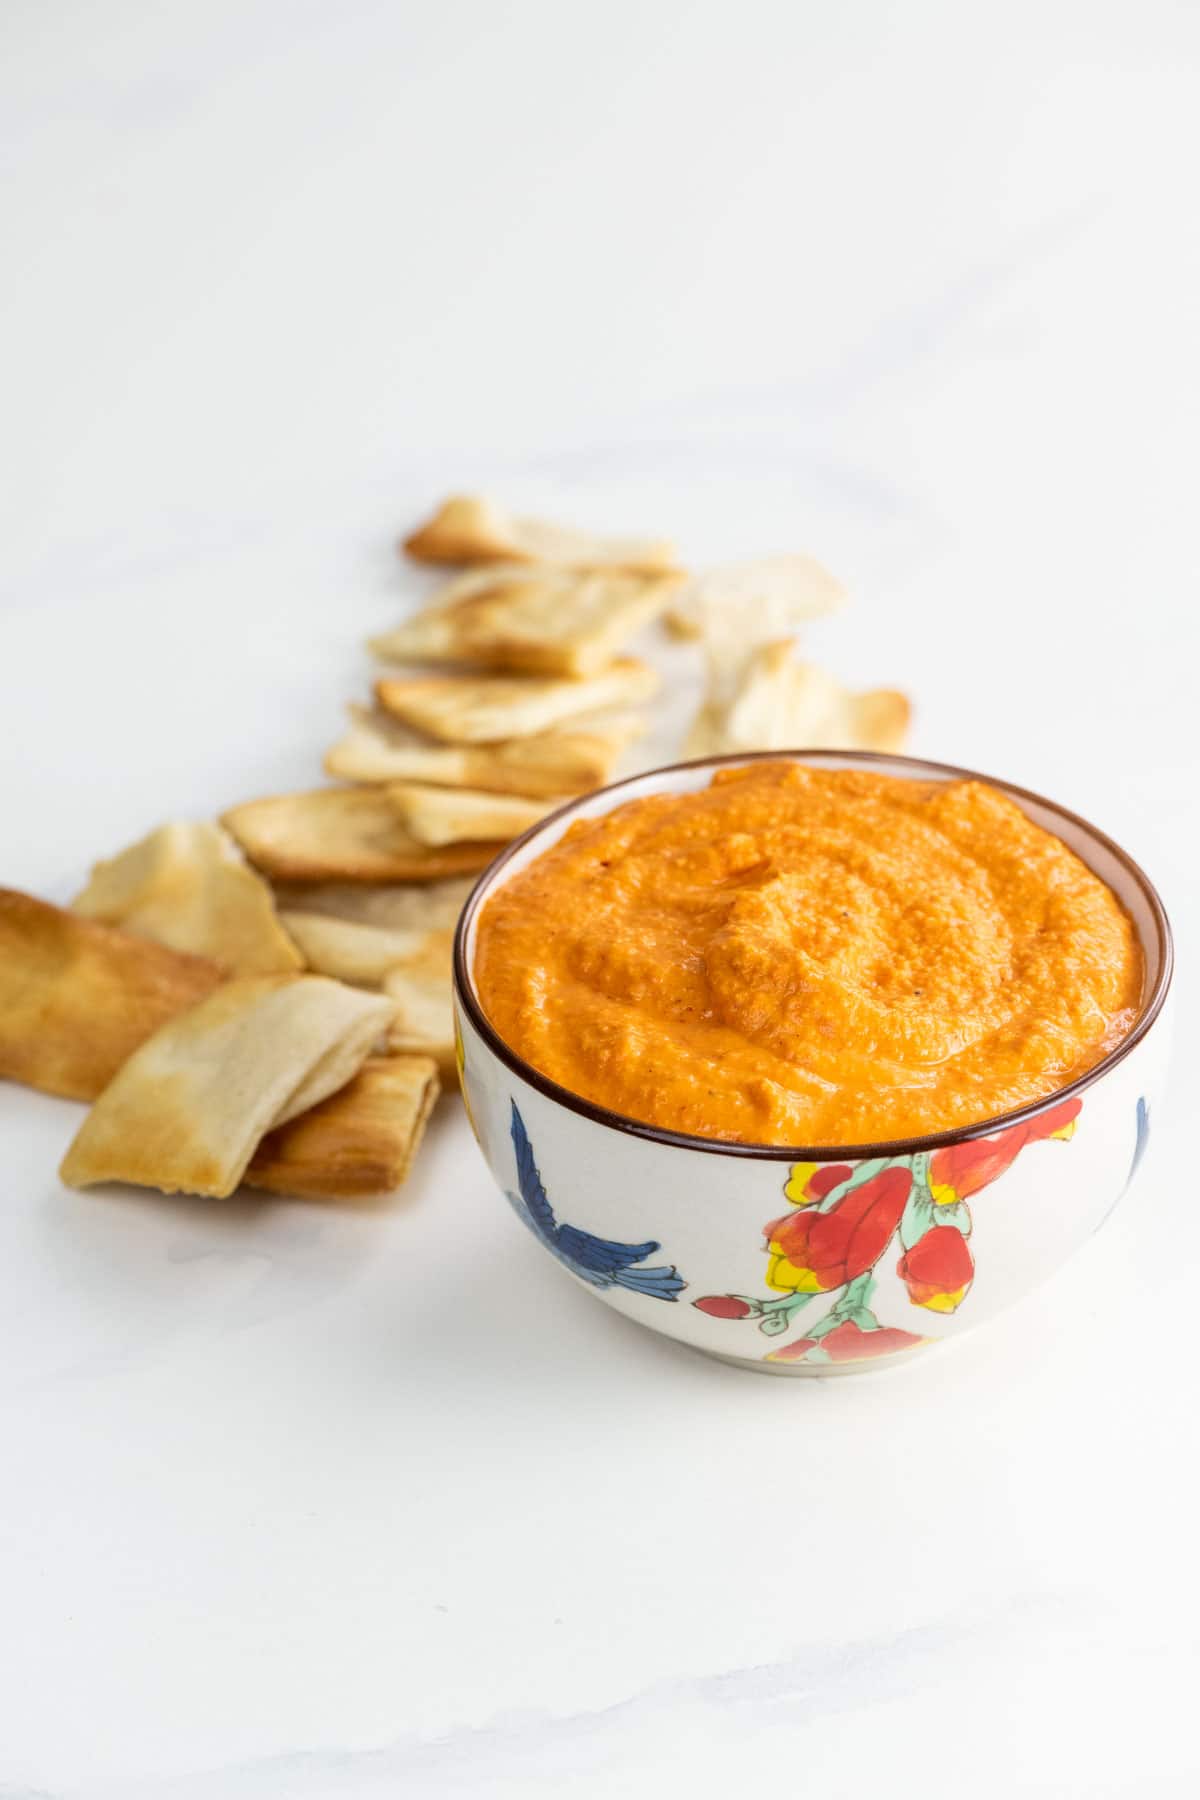 roasted red pepper hummus in a bowl with pita chips